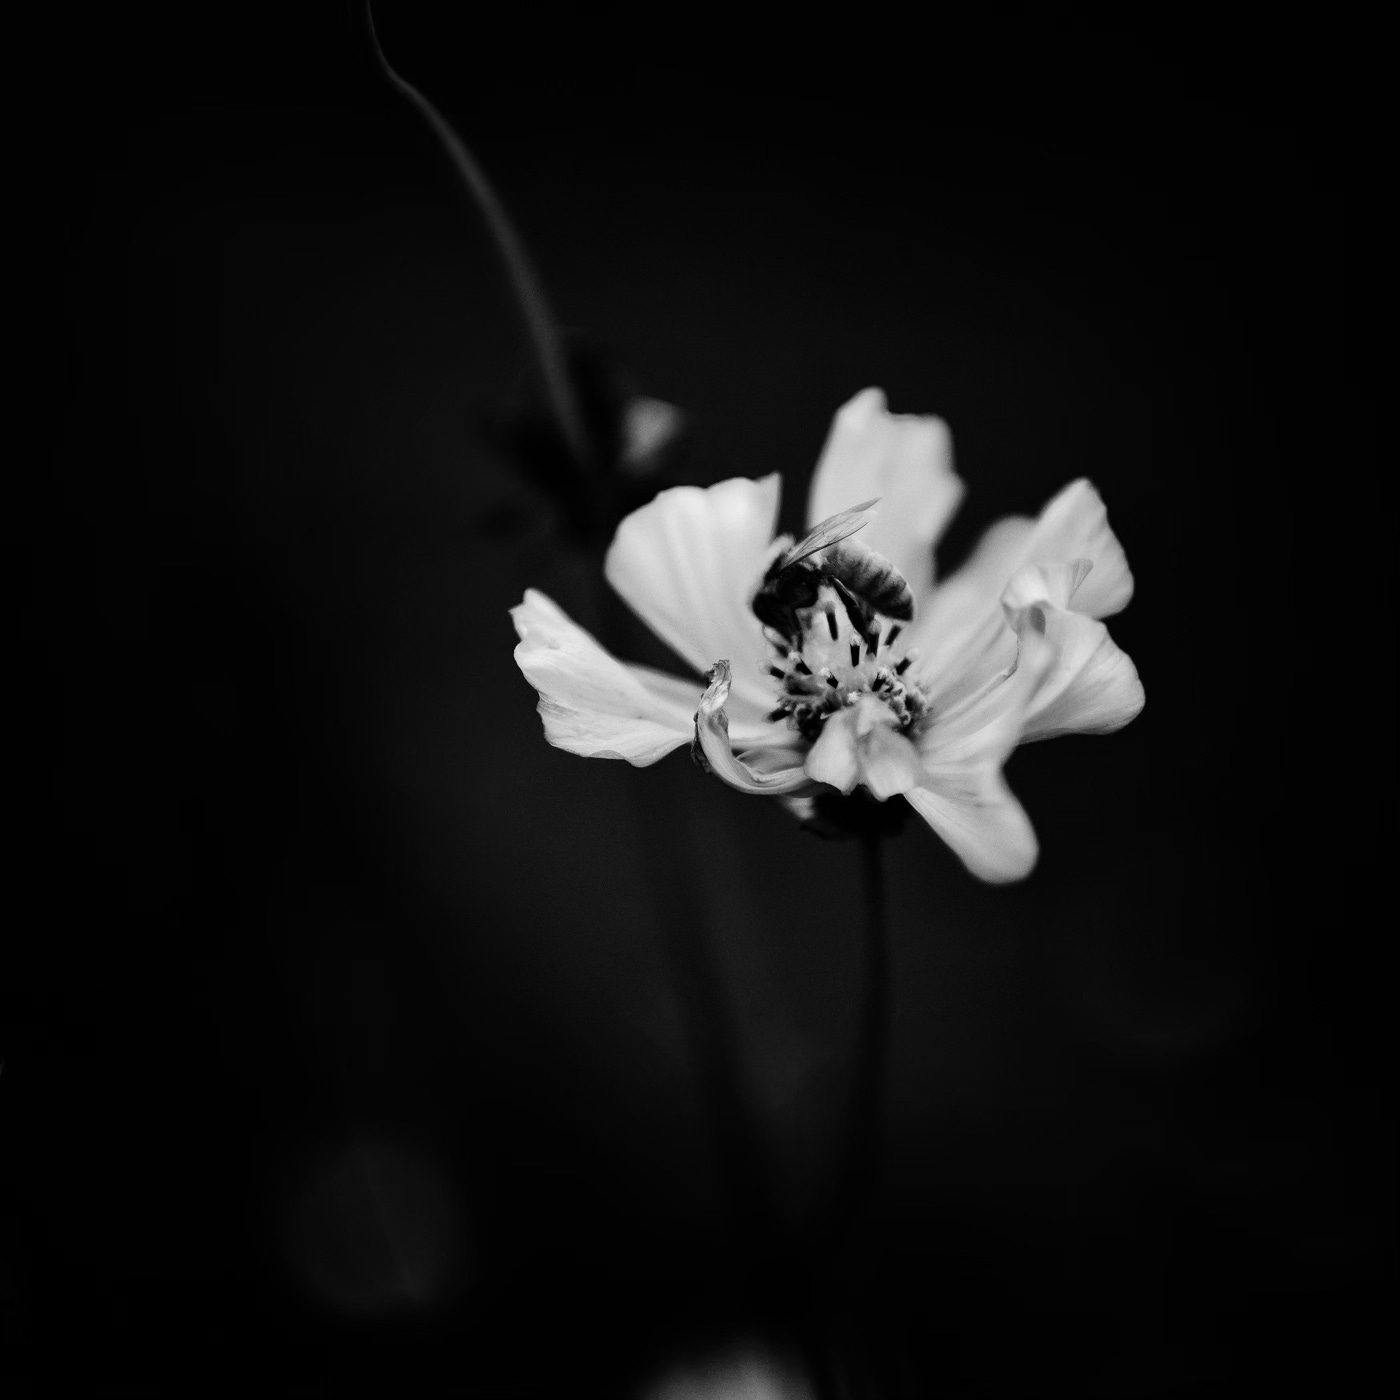 A bee nestles within the tender embrace of a flower's petals, a monochrome moment of nature's intimacy.